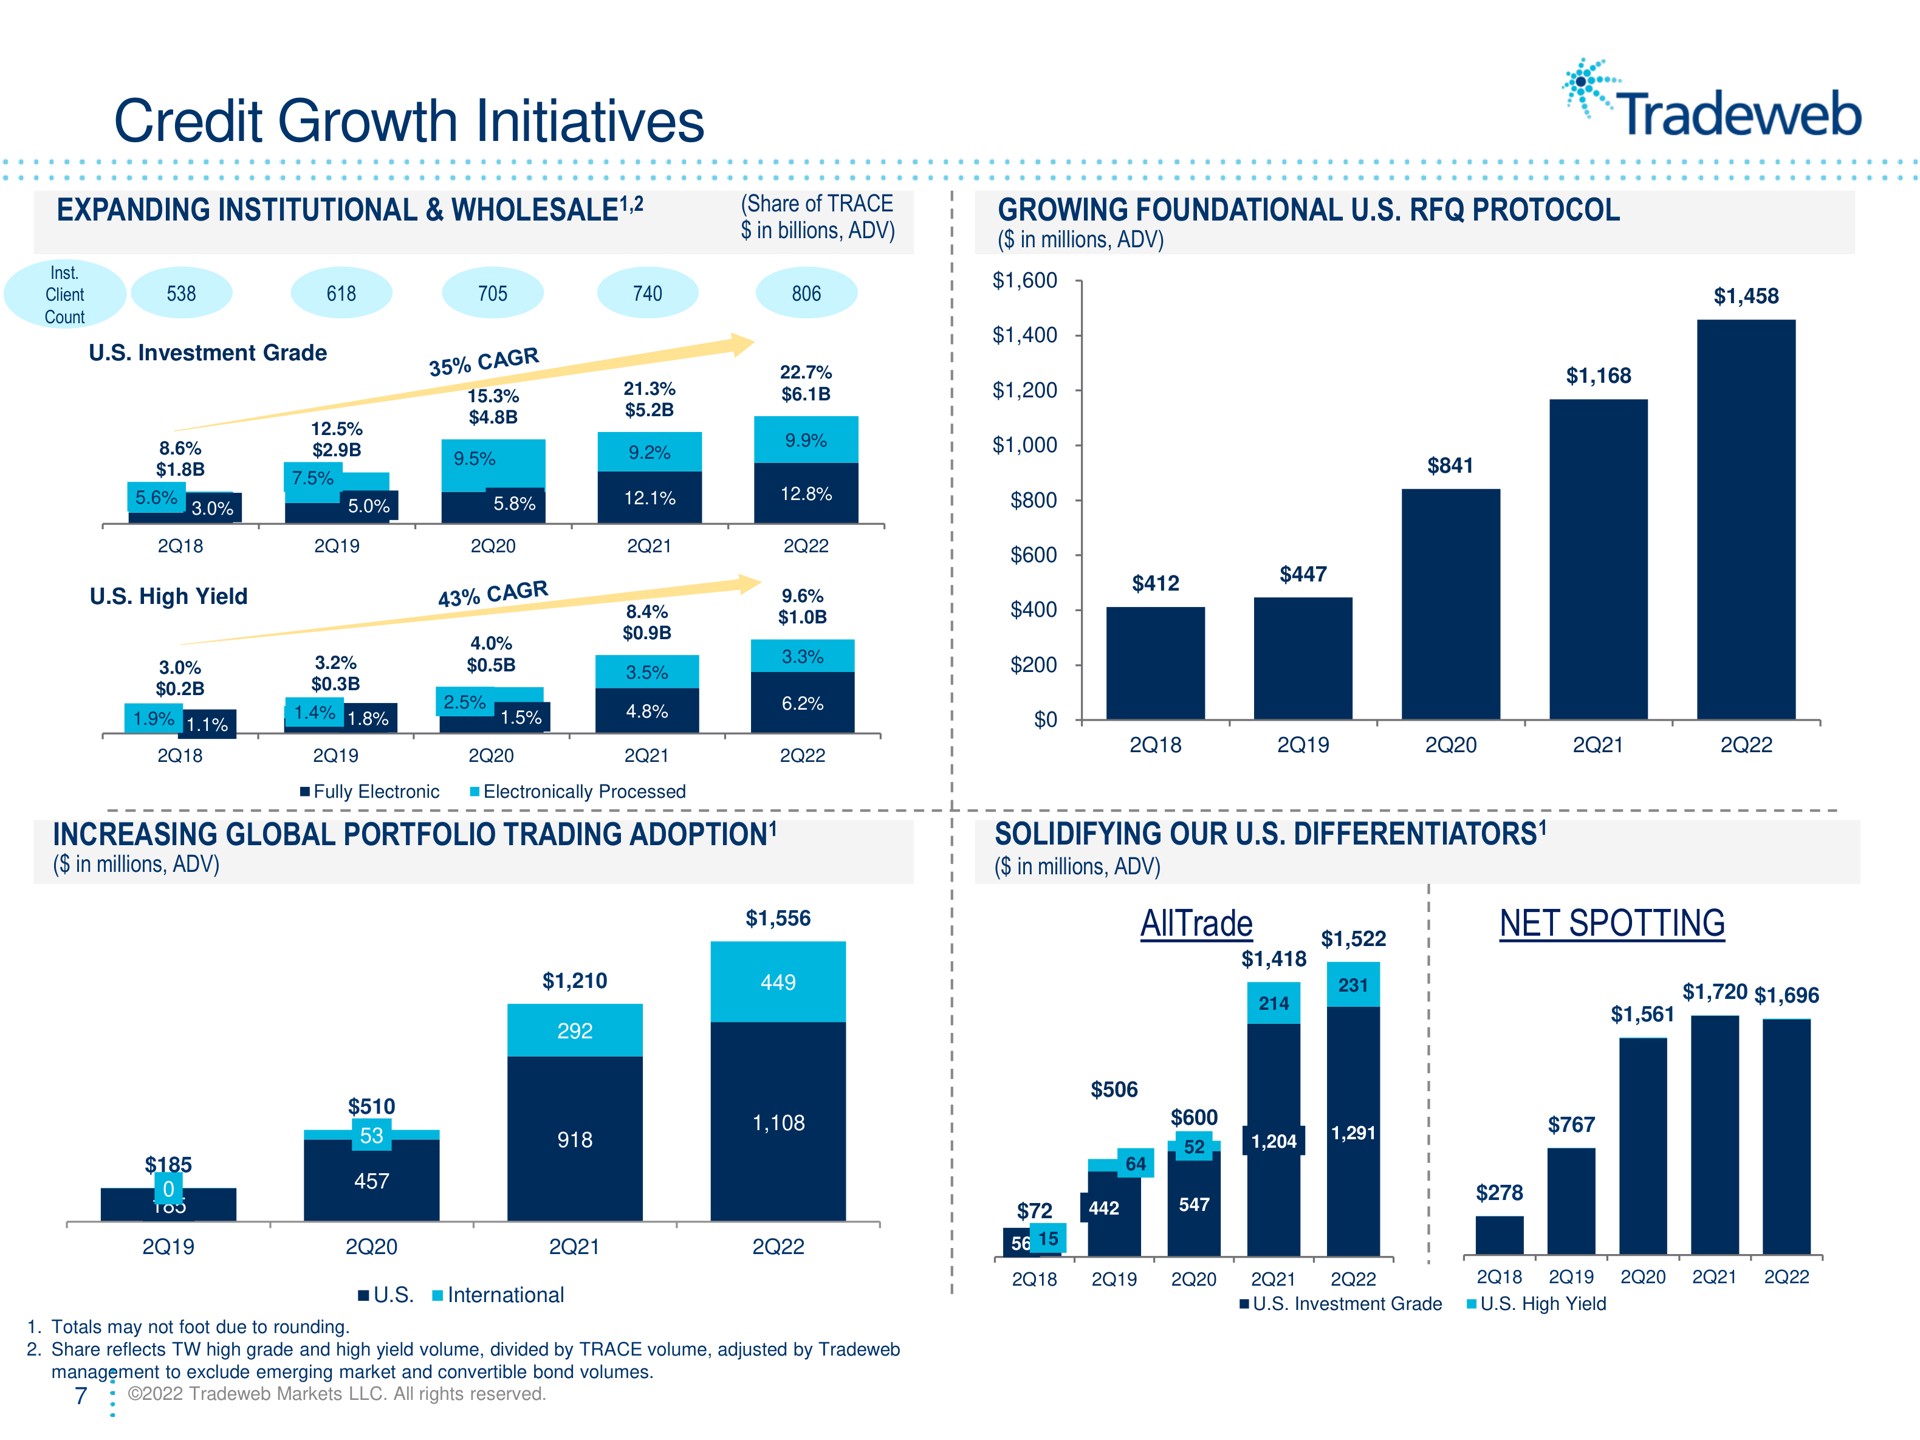 credit growth initiatives expanding institutional wholesale growing foundational protocol increasing global portfolio trading adoption solidifying our differentiators net spotting | Tradeweb